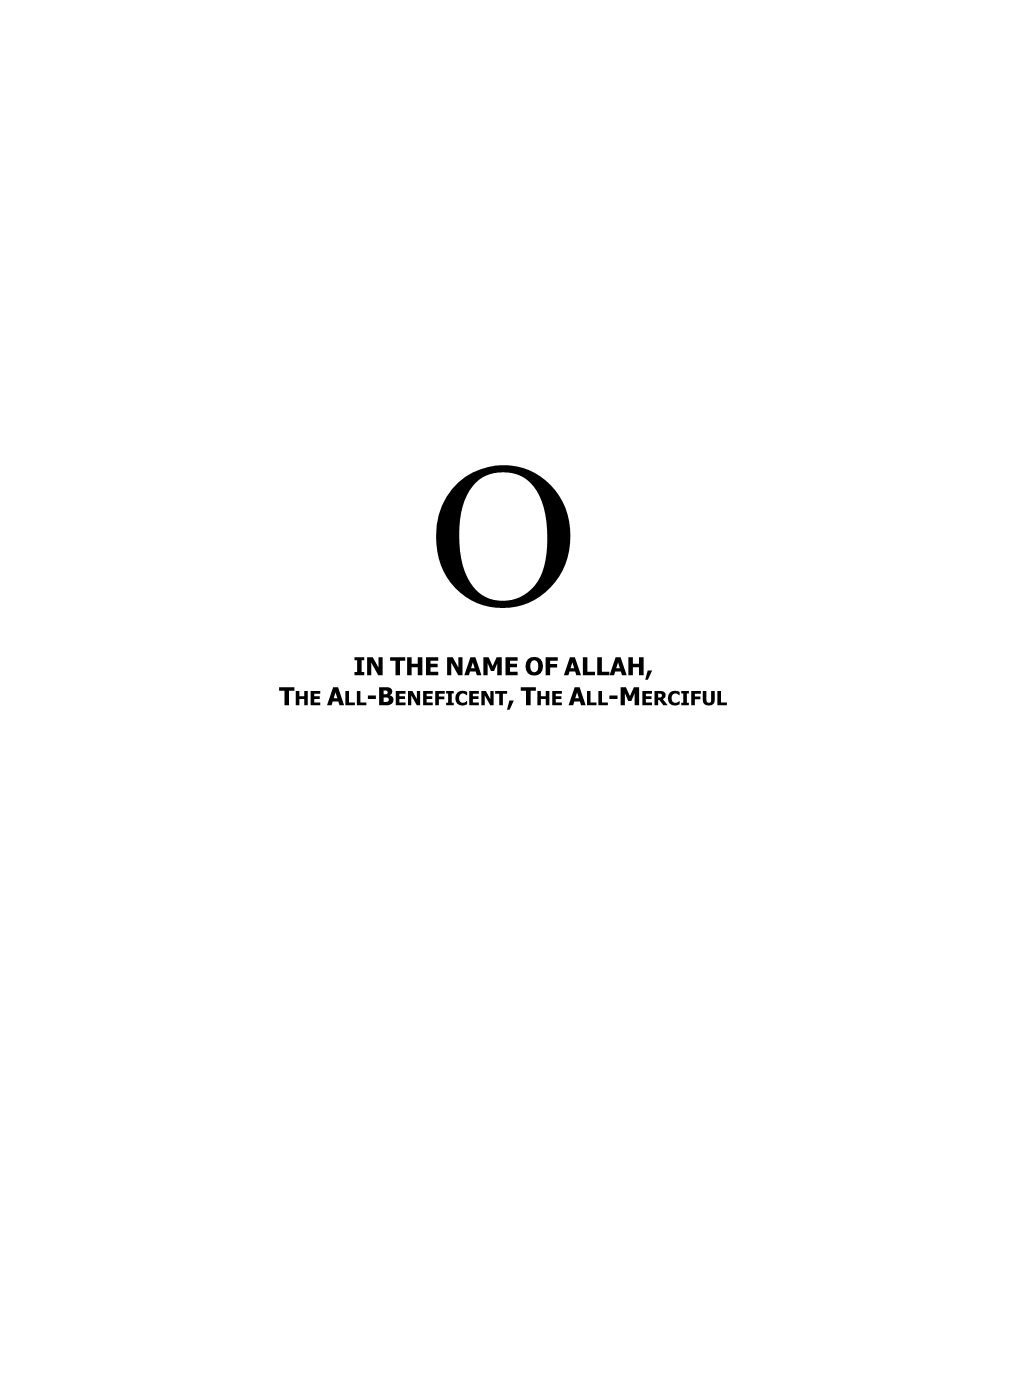 In the Name of Allah, the All-Beneficent, the All-Merciful